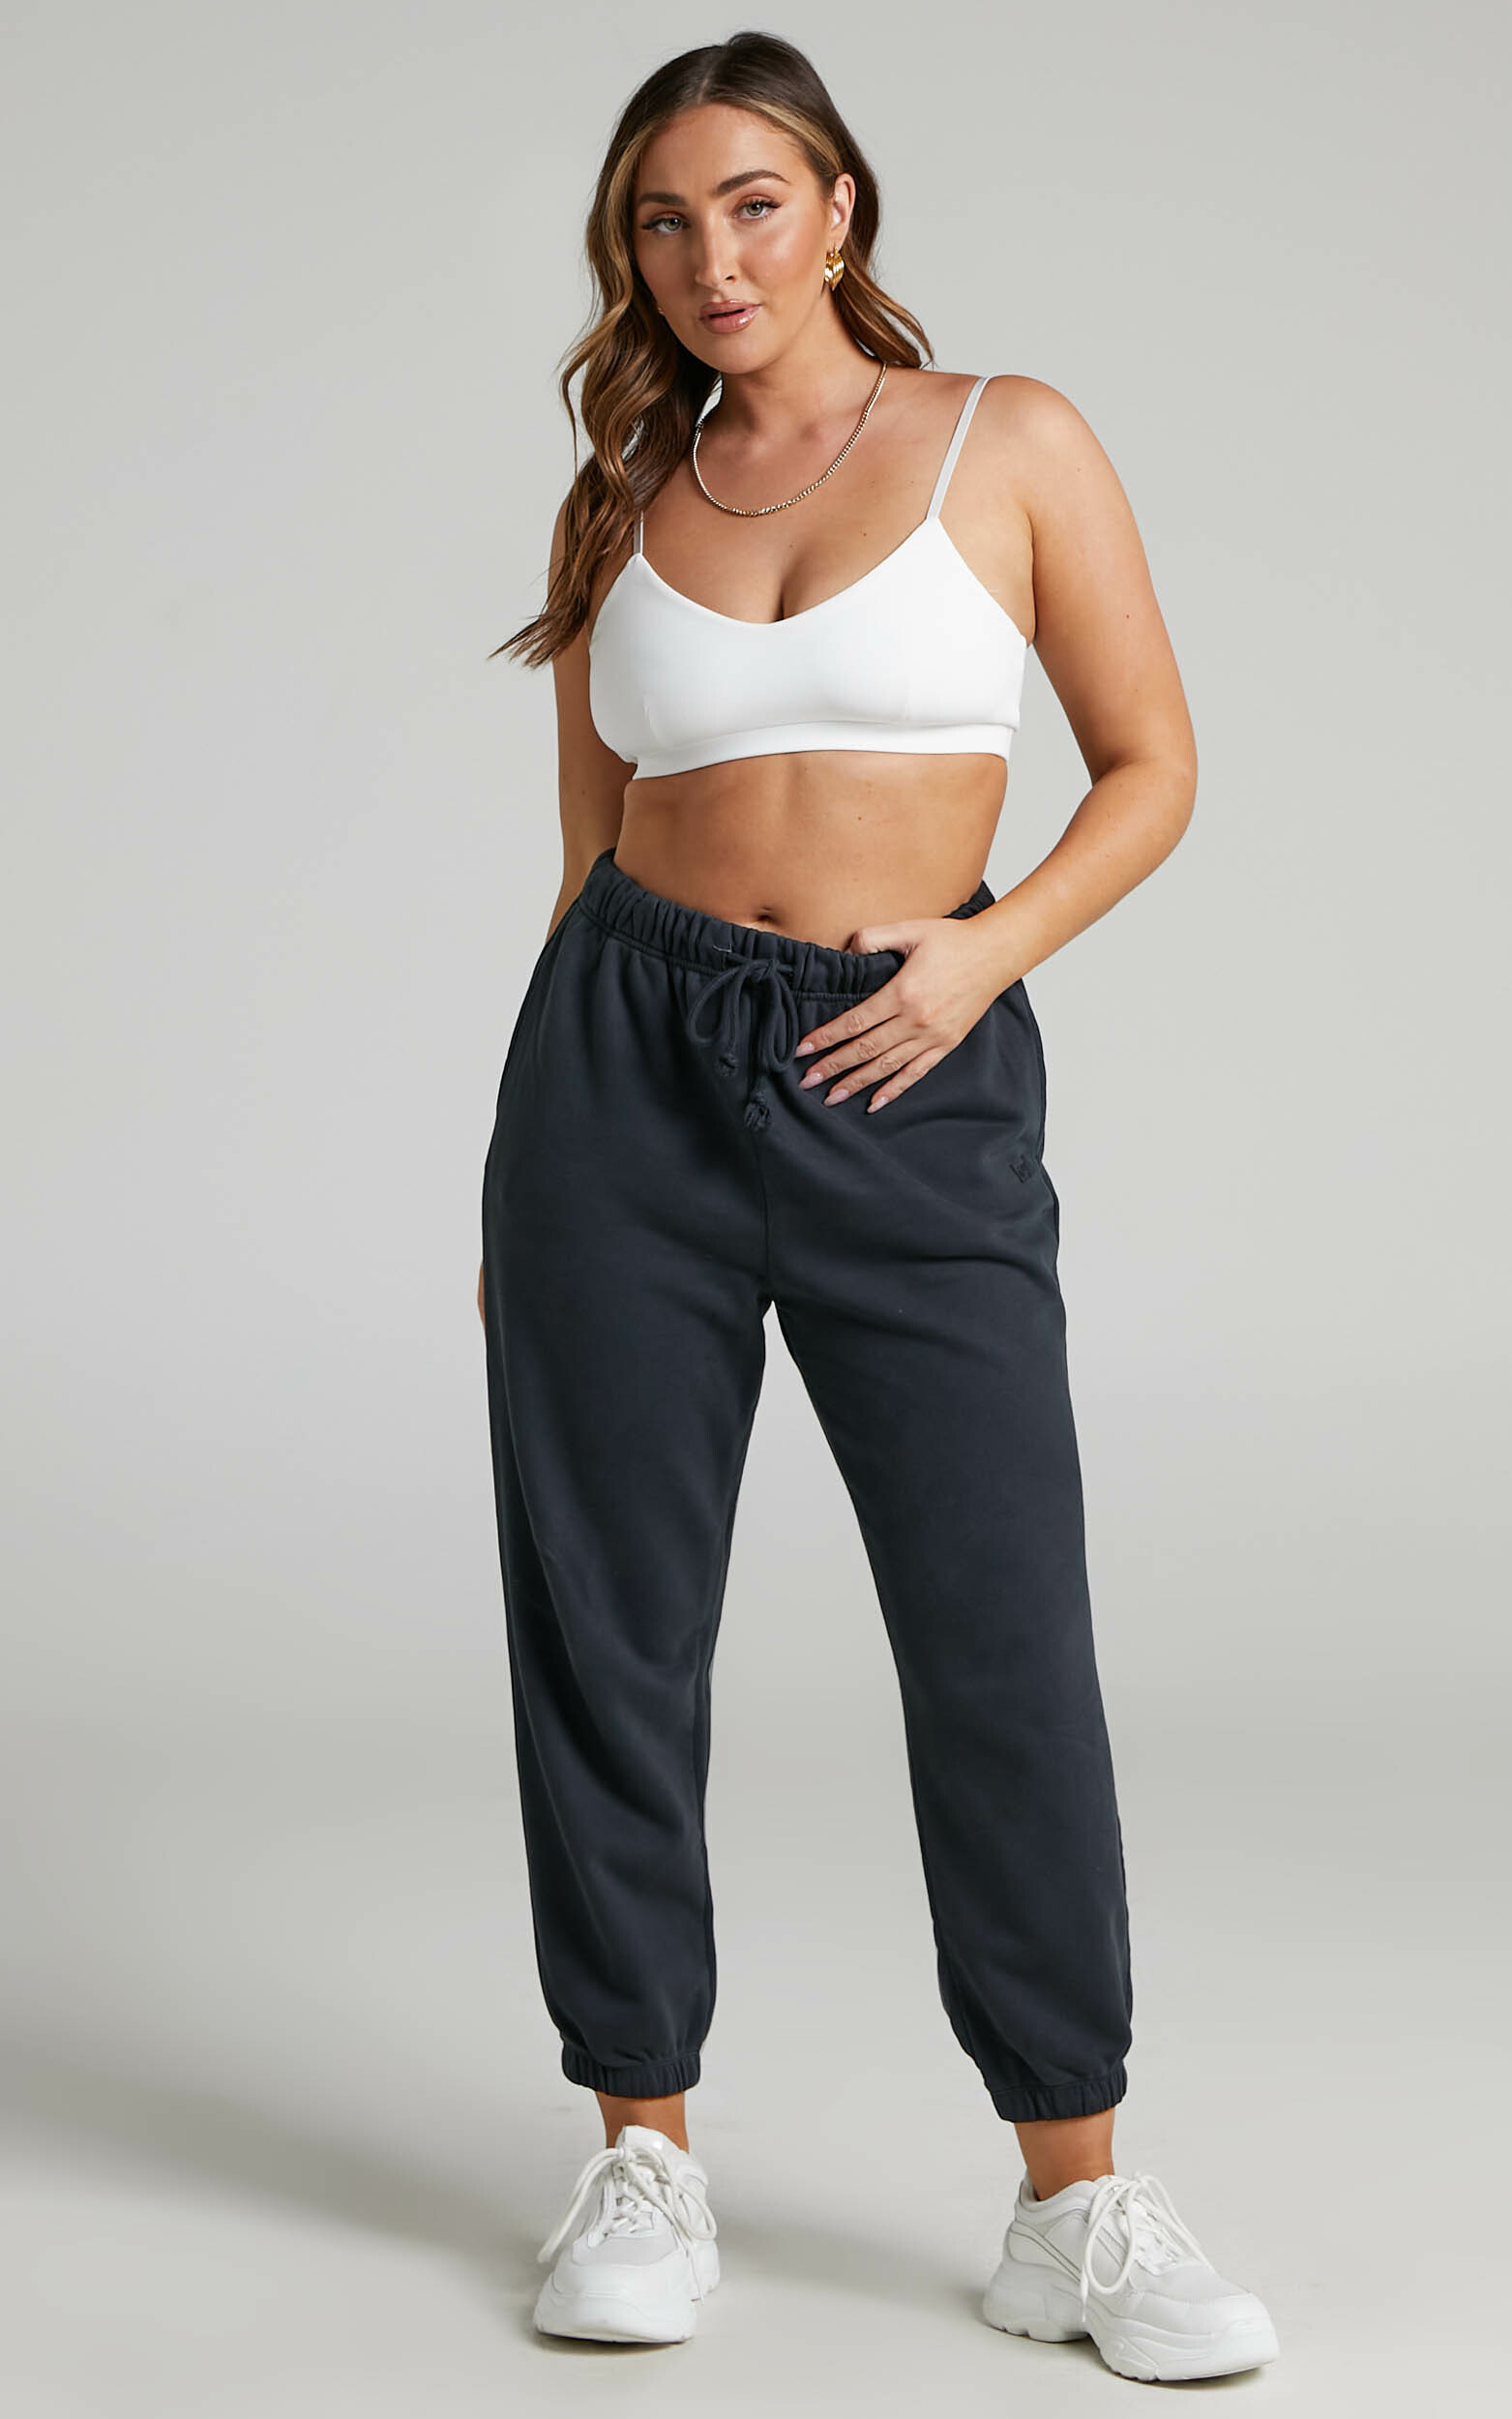 Levi's - WFH Trackpants in Tight Loops Caviar - L, BLK1, hi-res image number null